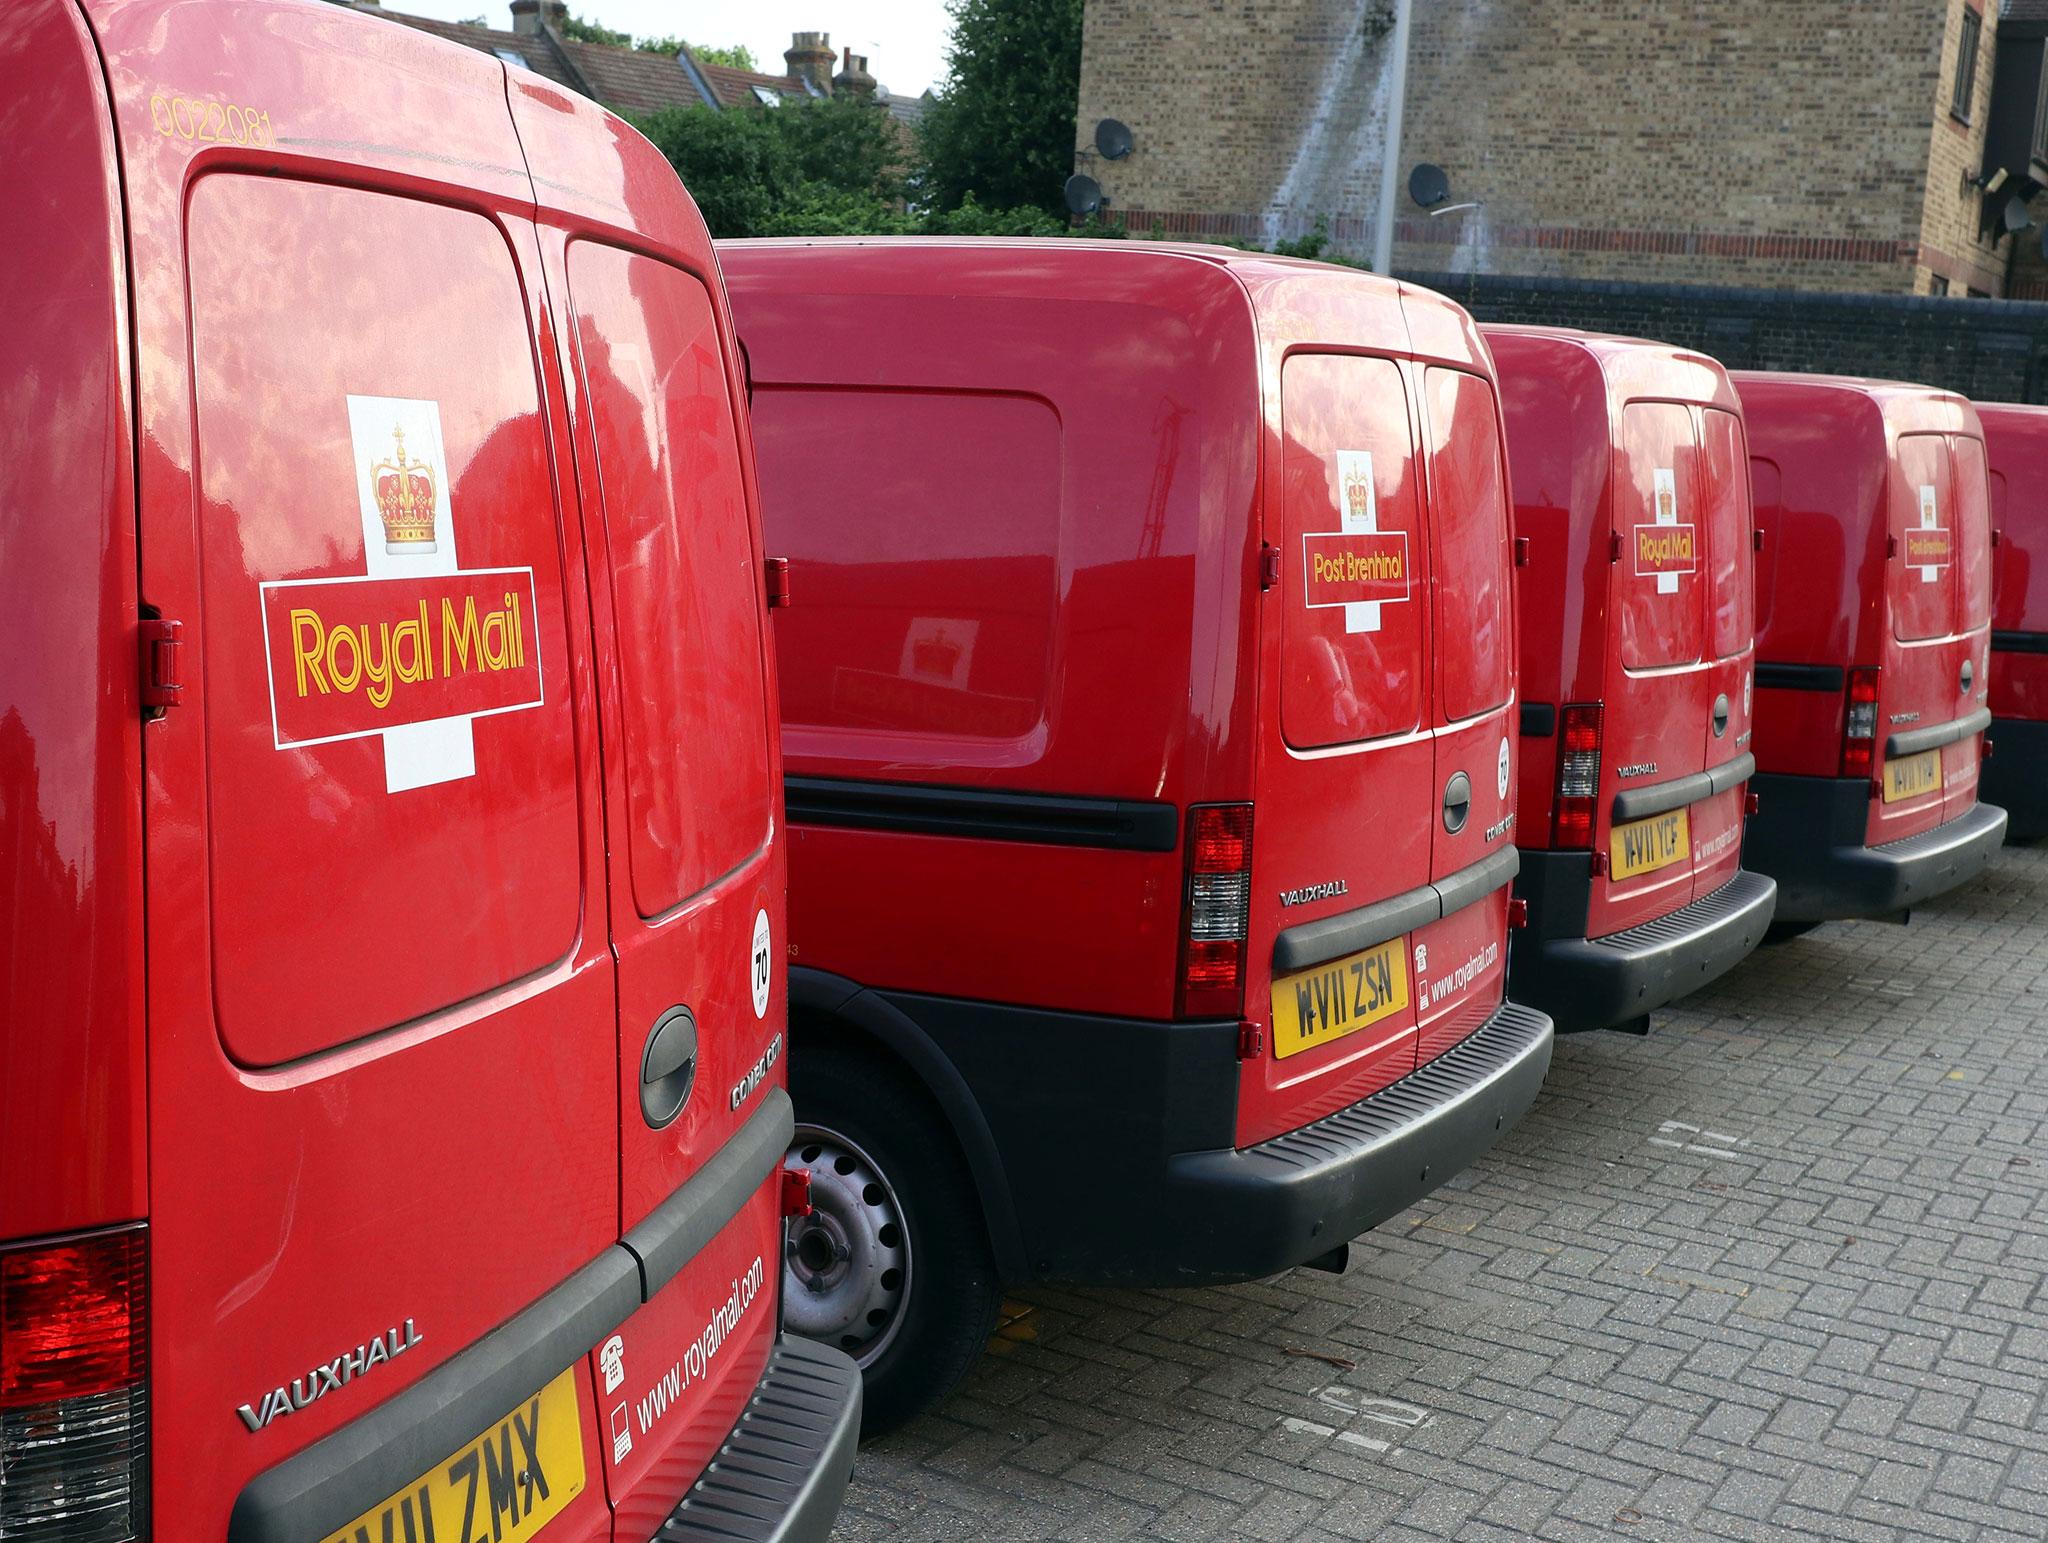 Royal Mail said that the court's decision had confirmed that any strike action prior to completion of agreed dispute resolution procedures would be unlawful